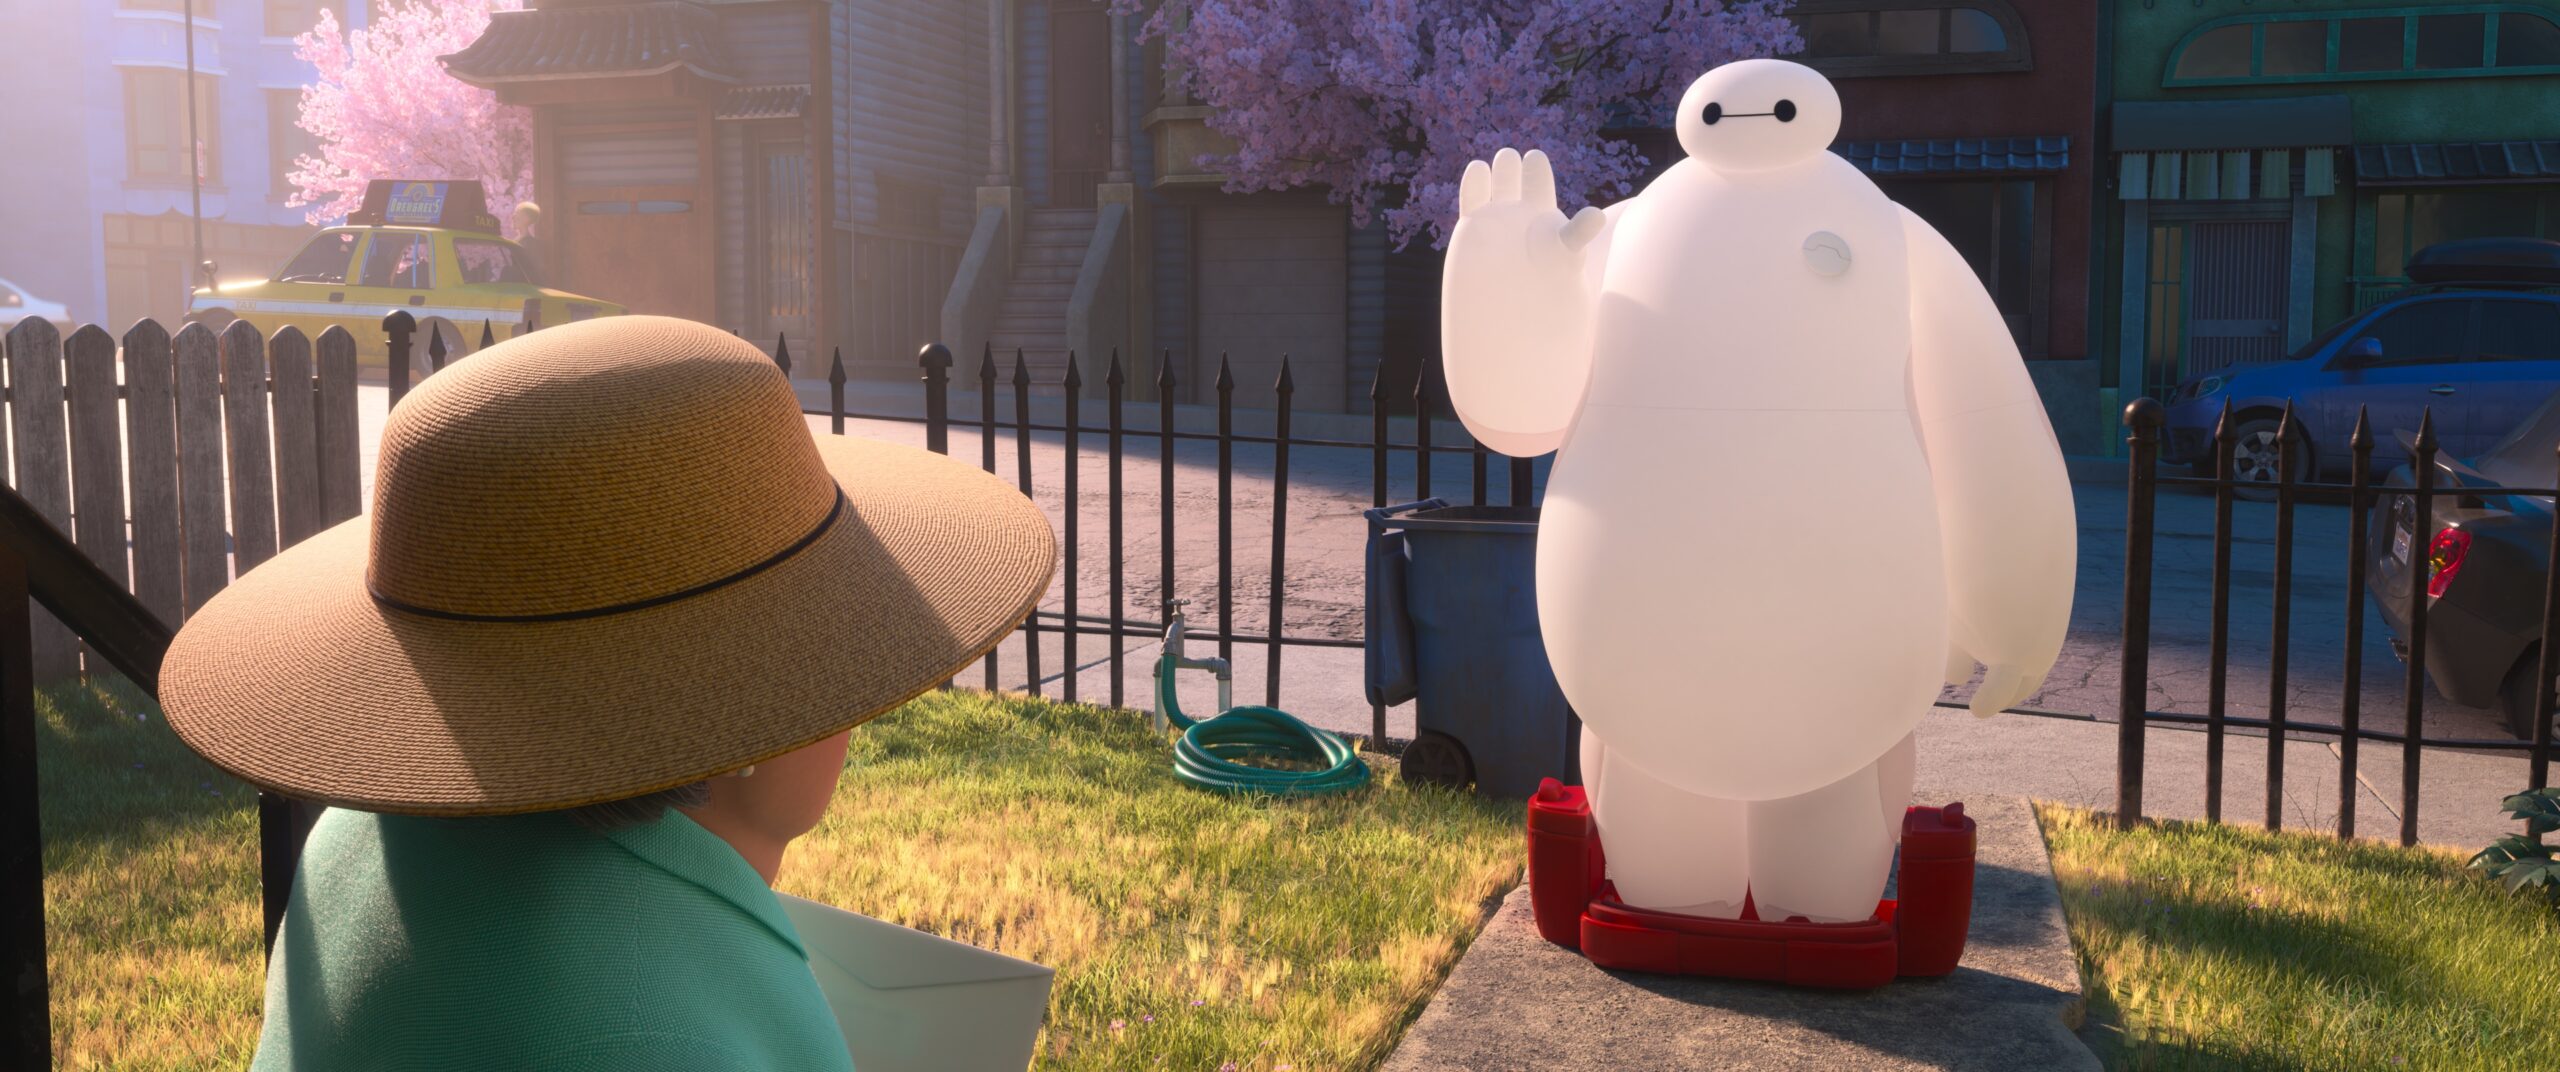 Scott Adsit On What Makes Baymax Special 